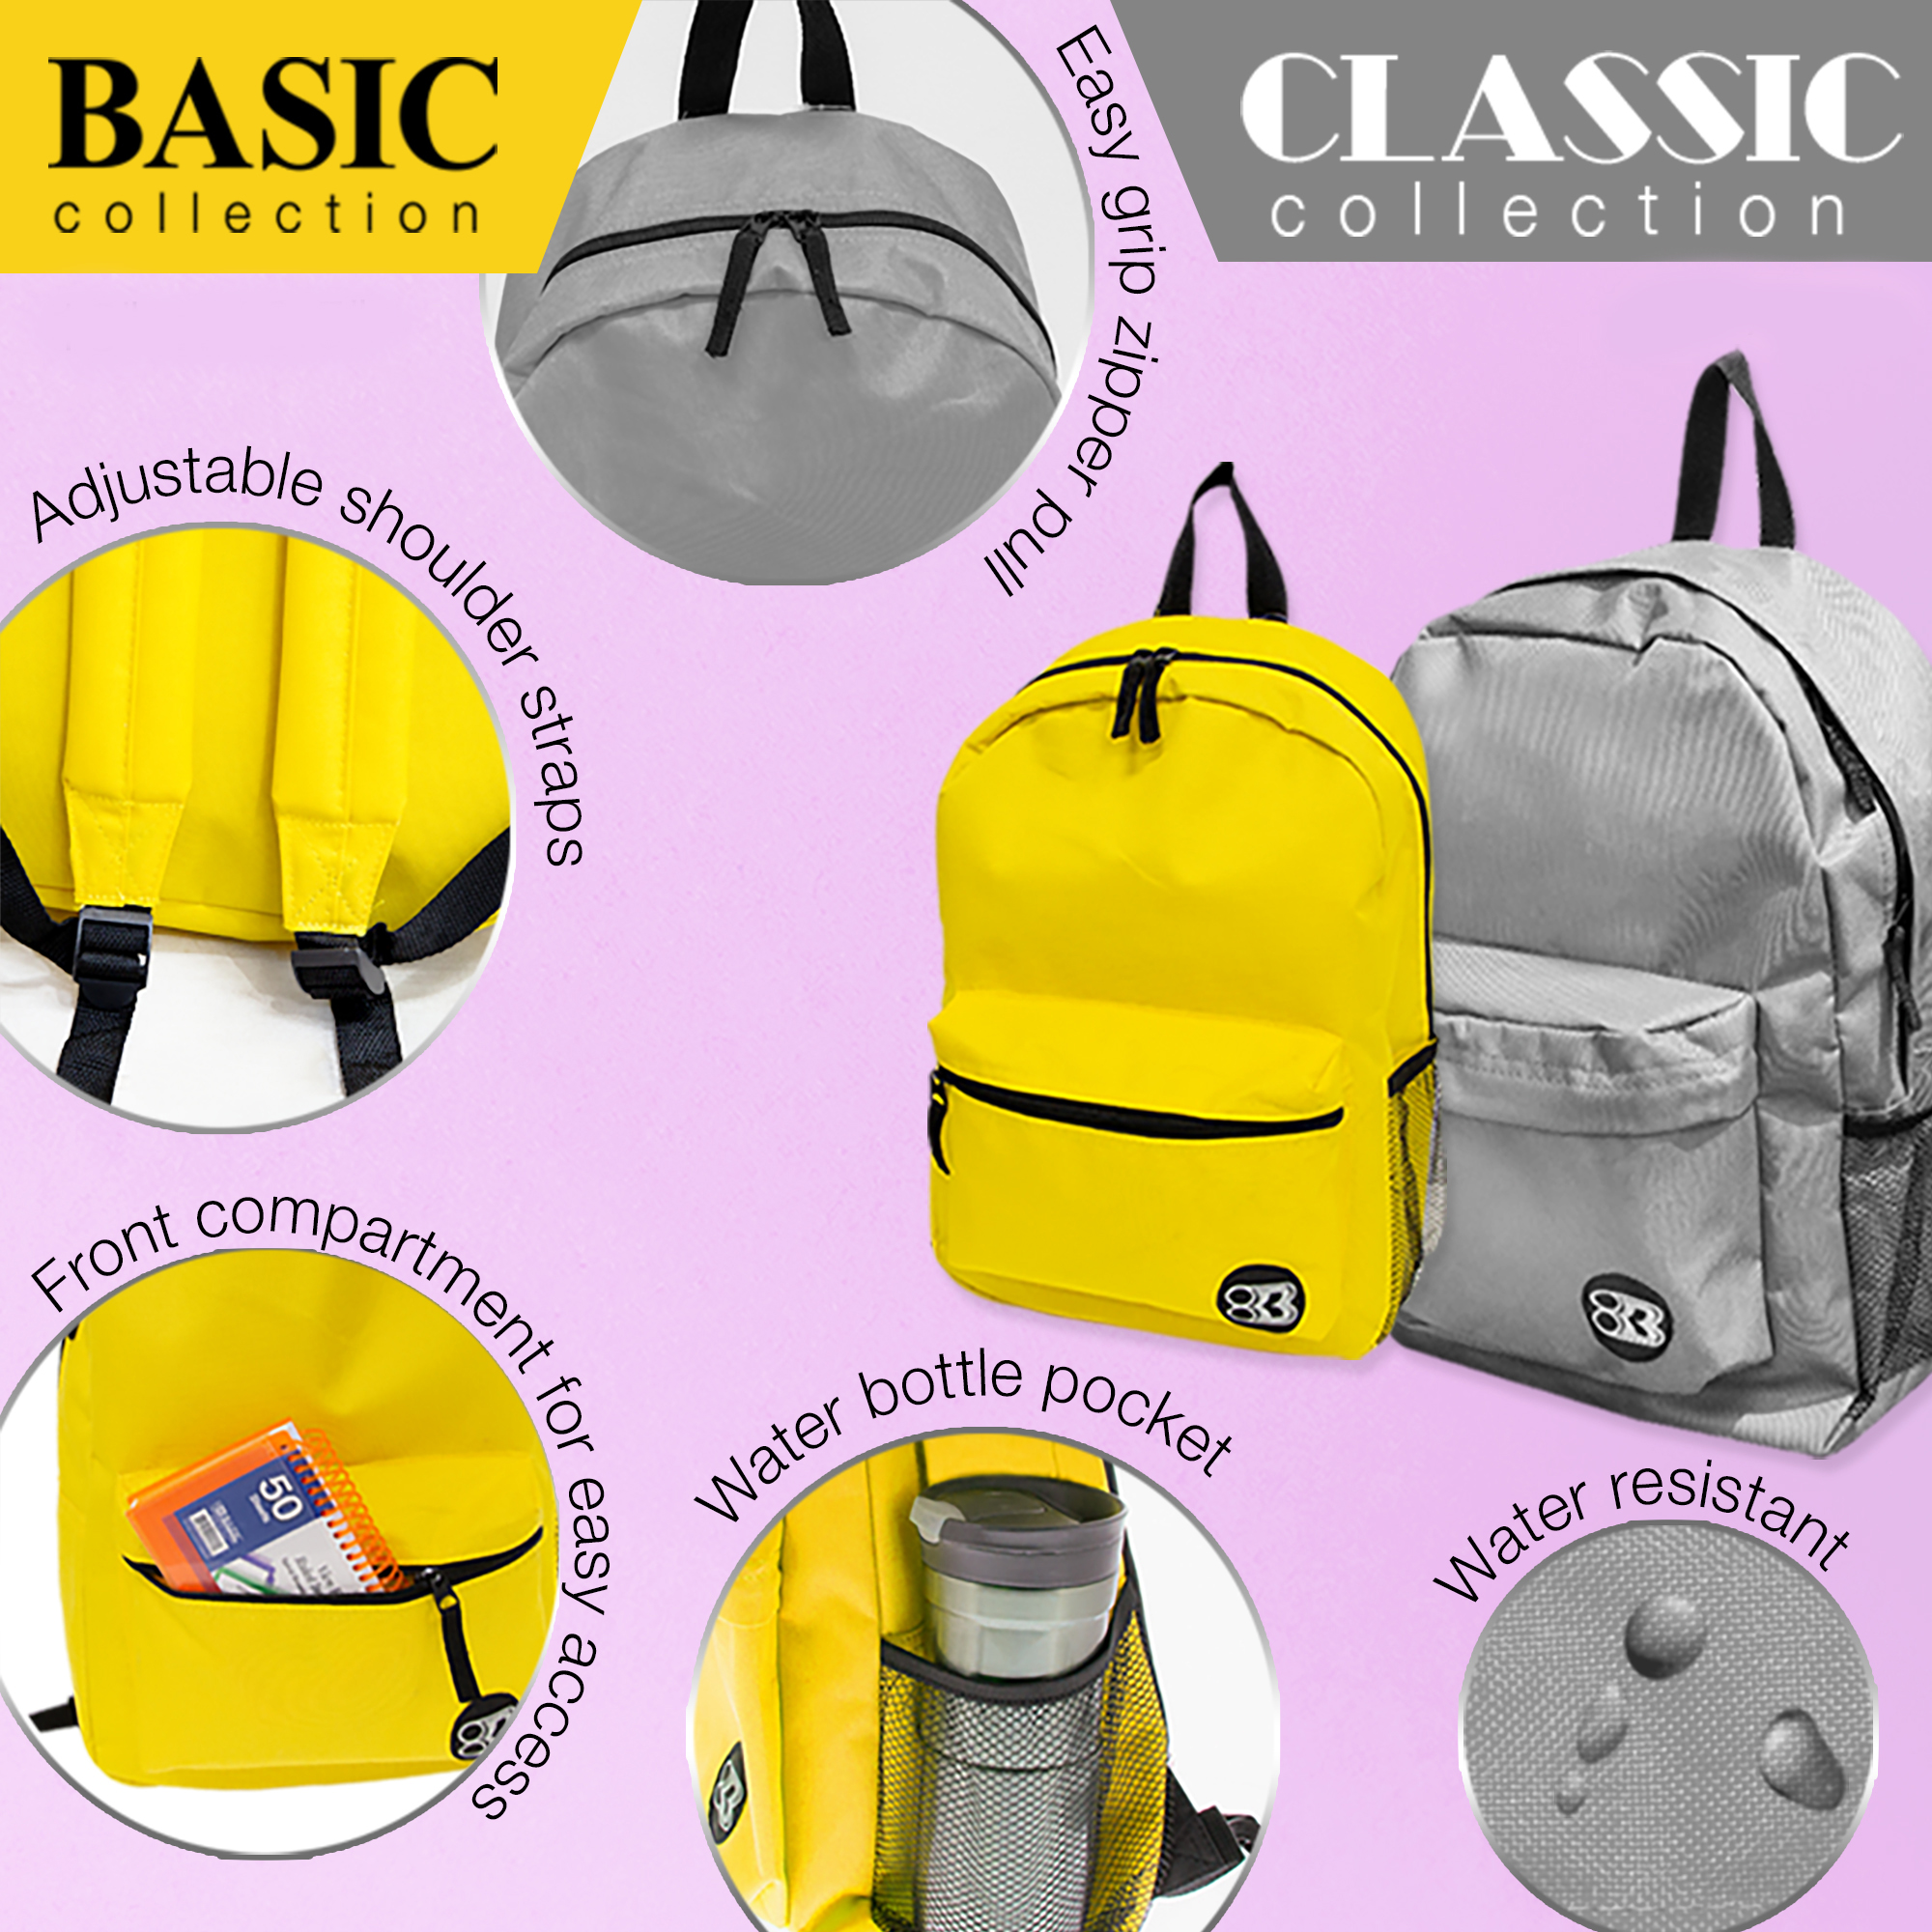 BAZIC School Backpack Basic 16" Mustard, School Bag for Students, 1-Pack - image 4 of 7